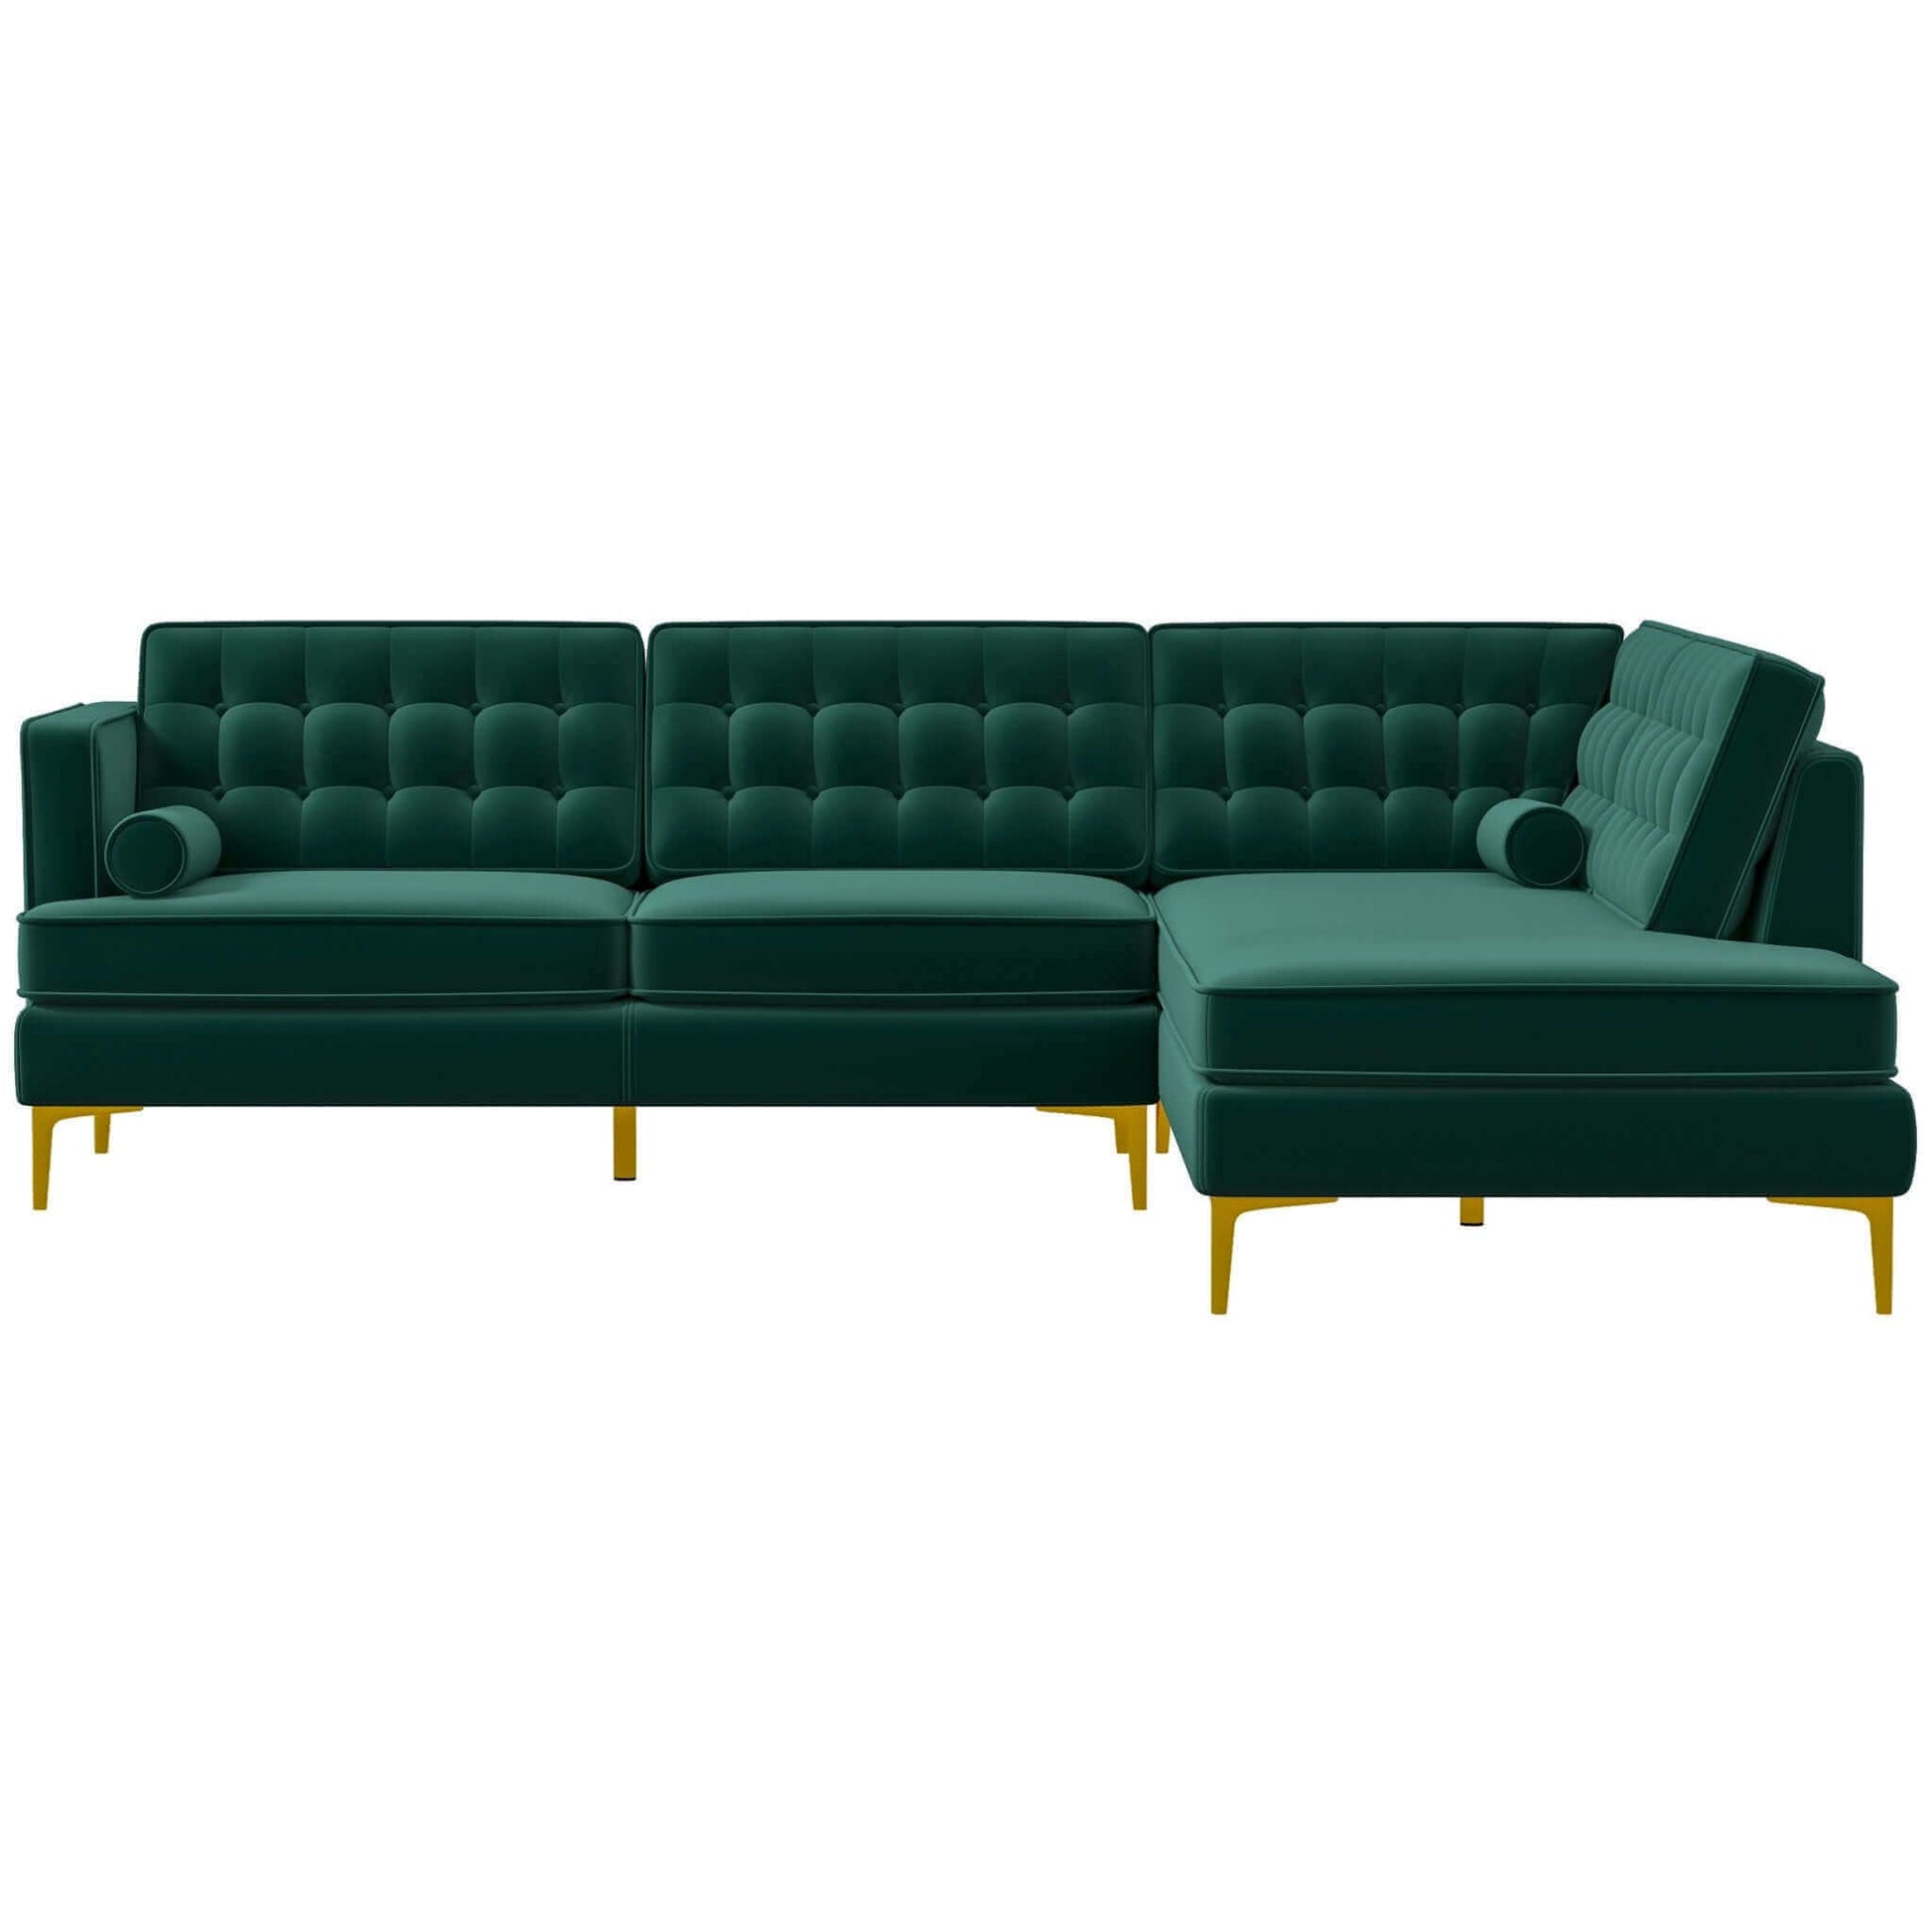 right Mid-Century Modern Sectional Sofa green